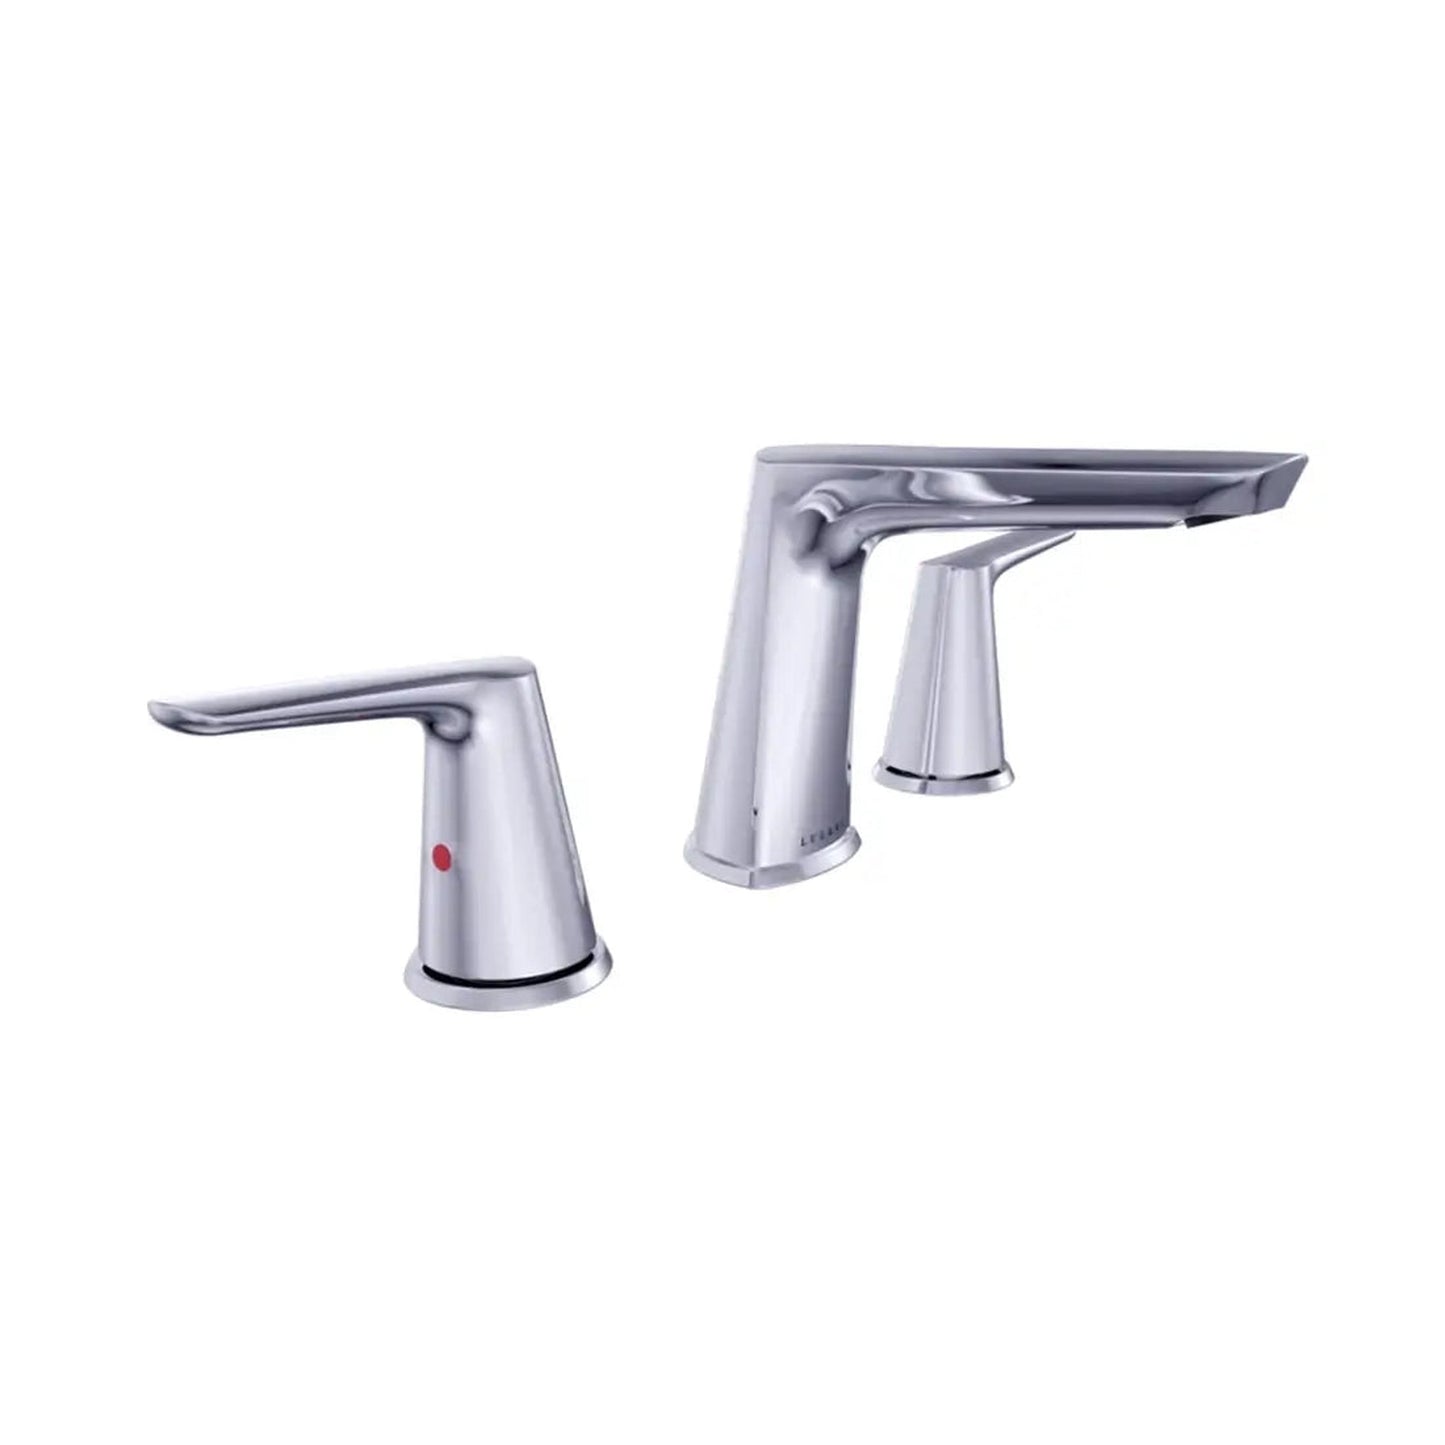 Lulani Bora Bora Chrome 1.2 GPM Widespread Two Handle Faucet With Drain Assembly